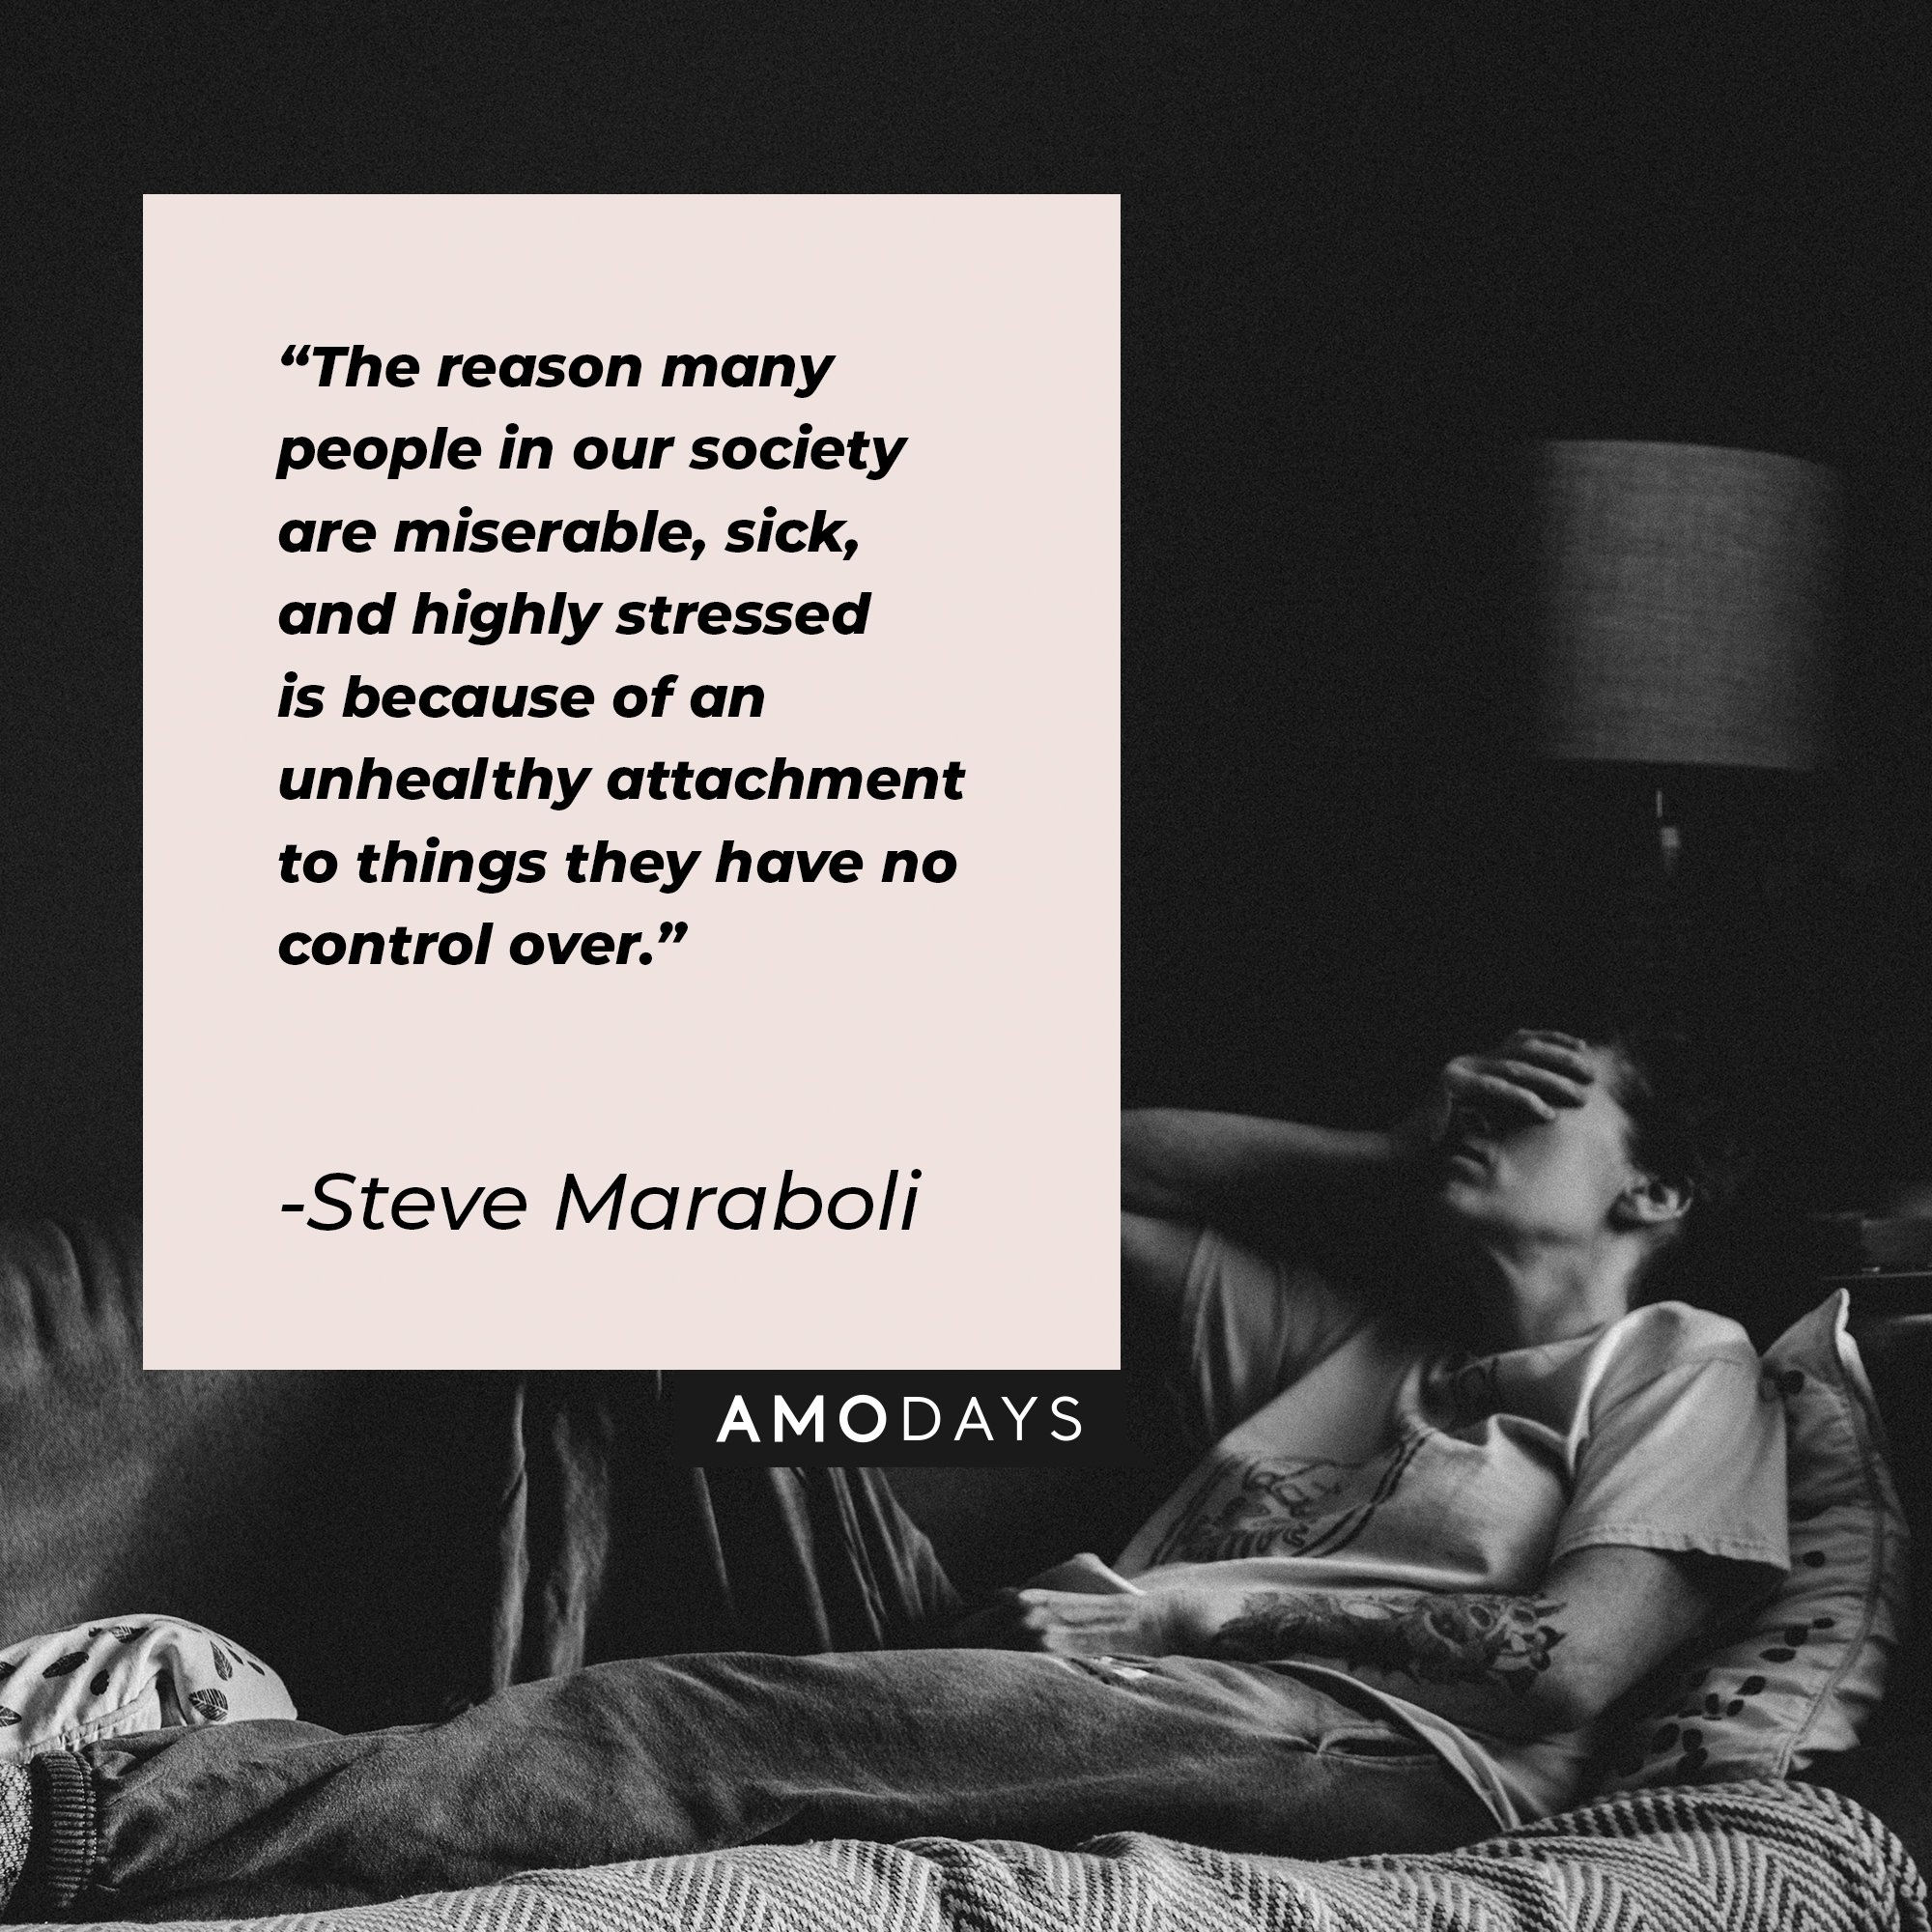 Steve Maraboli’s quote: "The reason many people in our society are miserable, sick, and highly stressed is because of an unhealthy attachment to things they have no control over." | Image: AmoDays